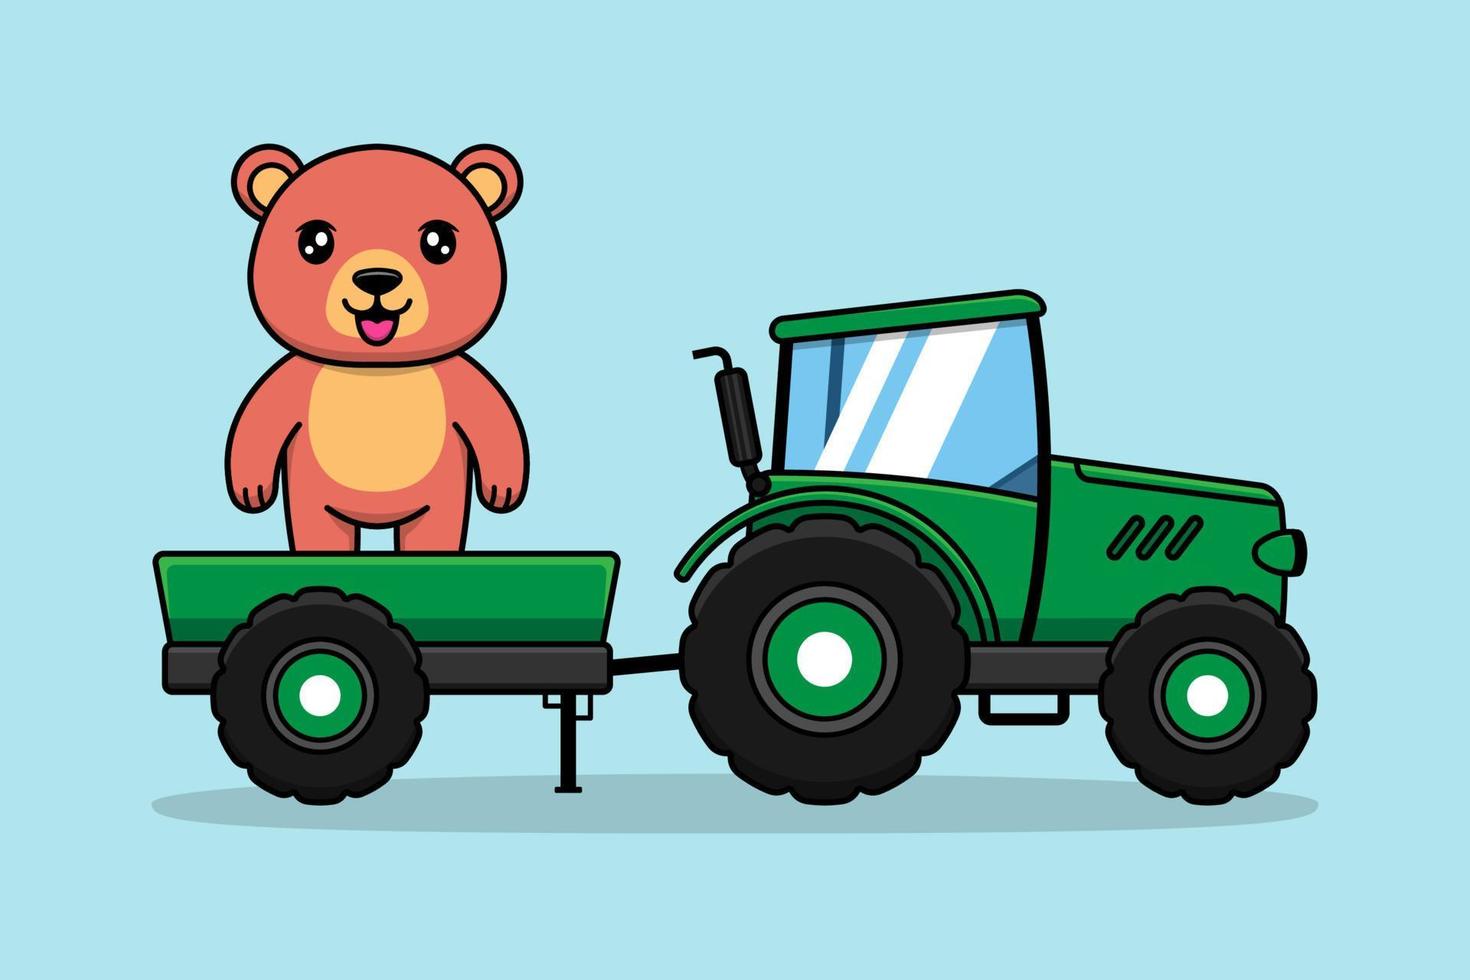 Cute bear standing on lorry vector